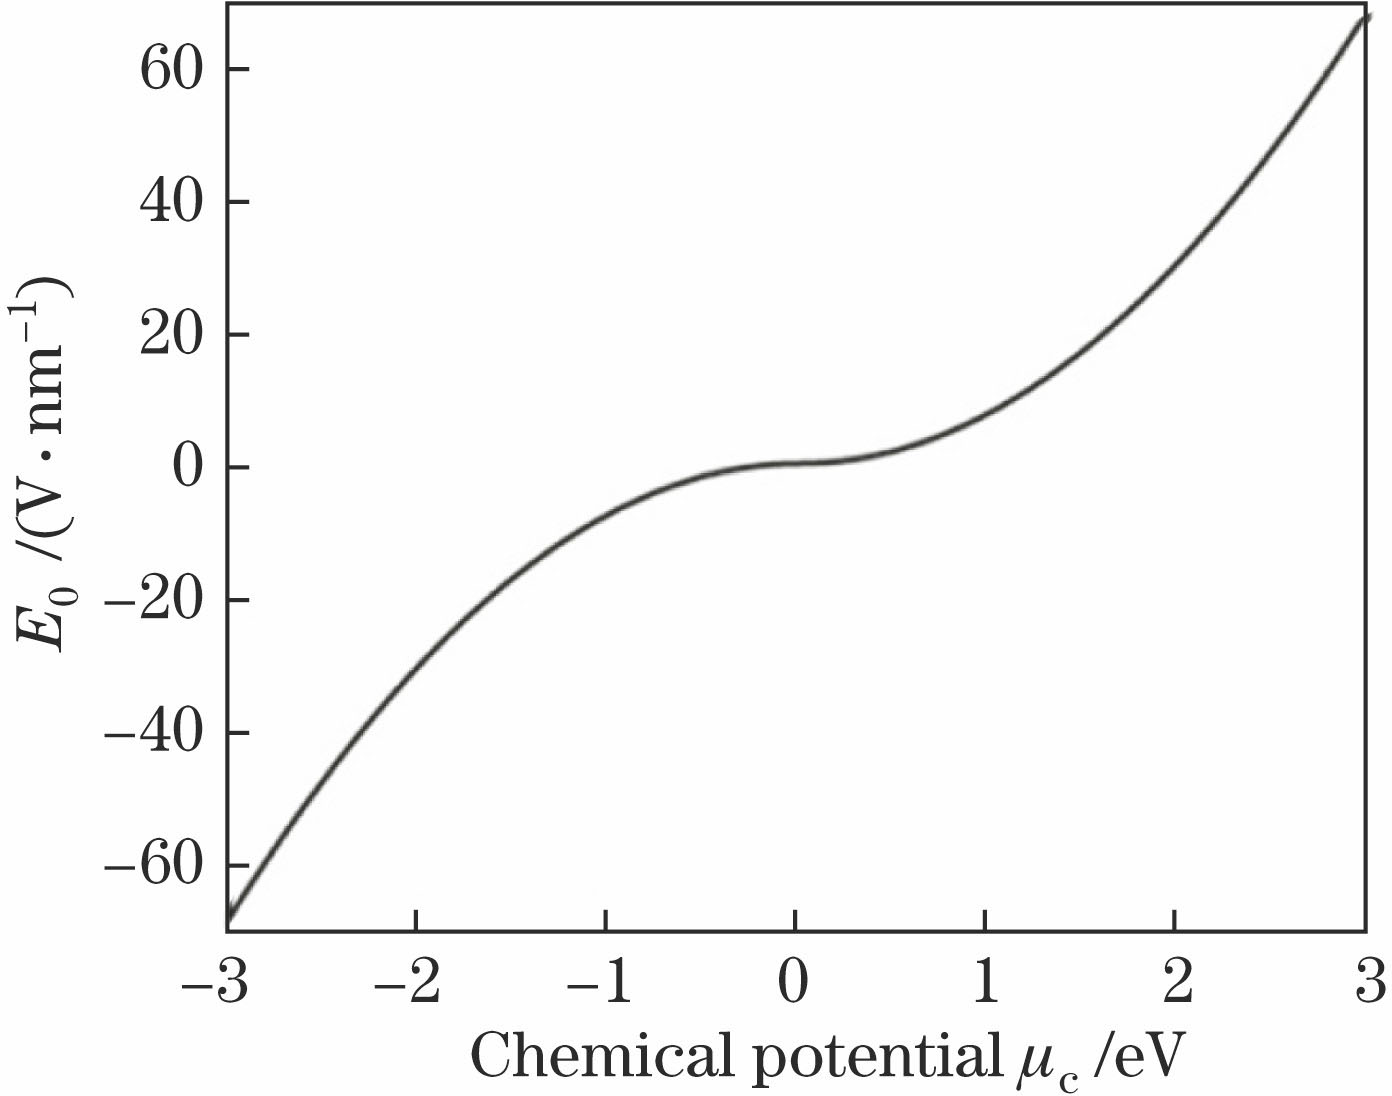 Relationship between bias electric field and chemical potential at εb=3.5 F/m